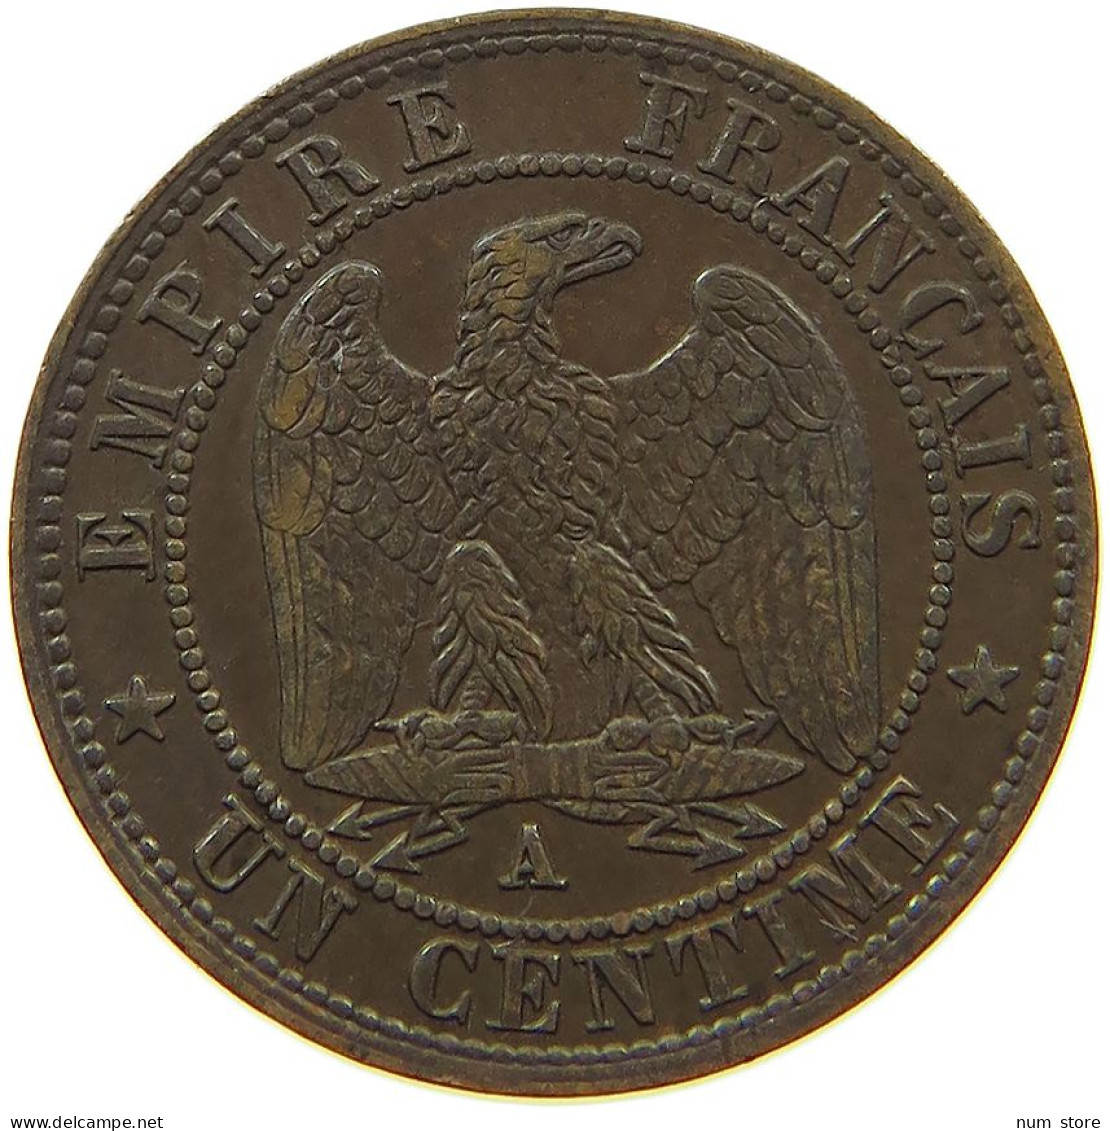 FRANCE CENTIME 1862 A Napoleon III. (1852-1870) #a015 0171 - 1 Centime